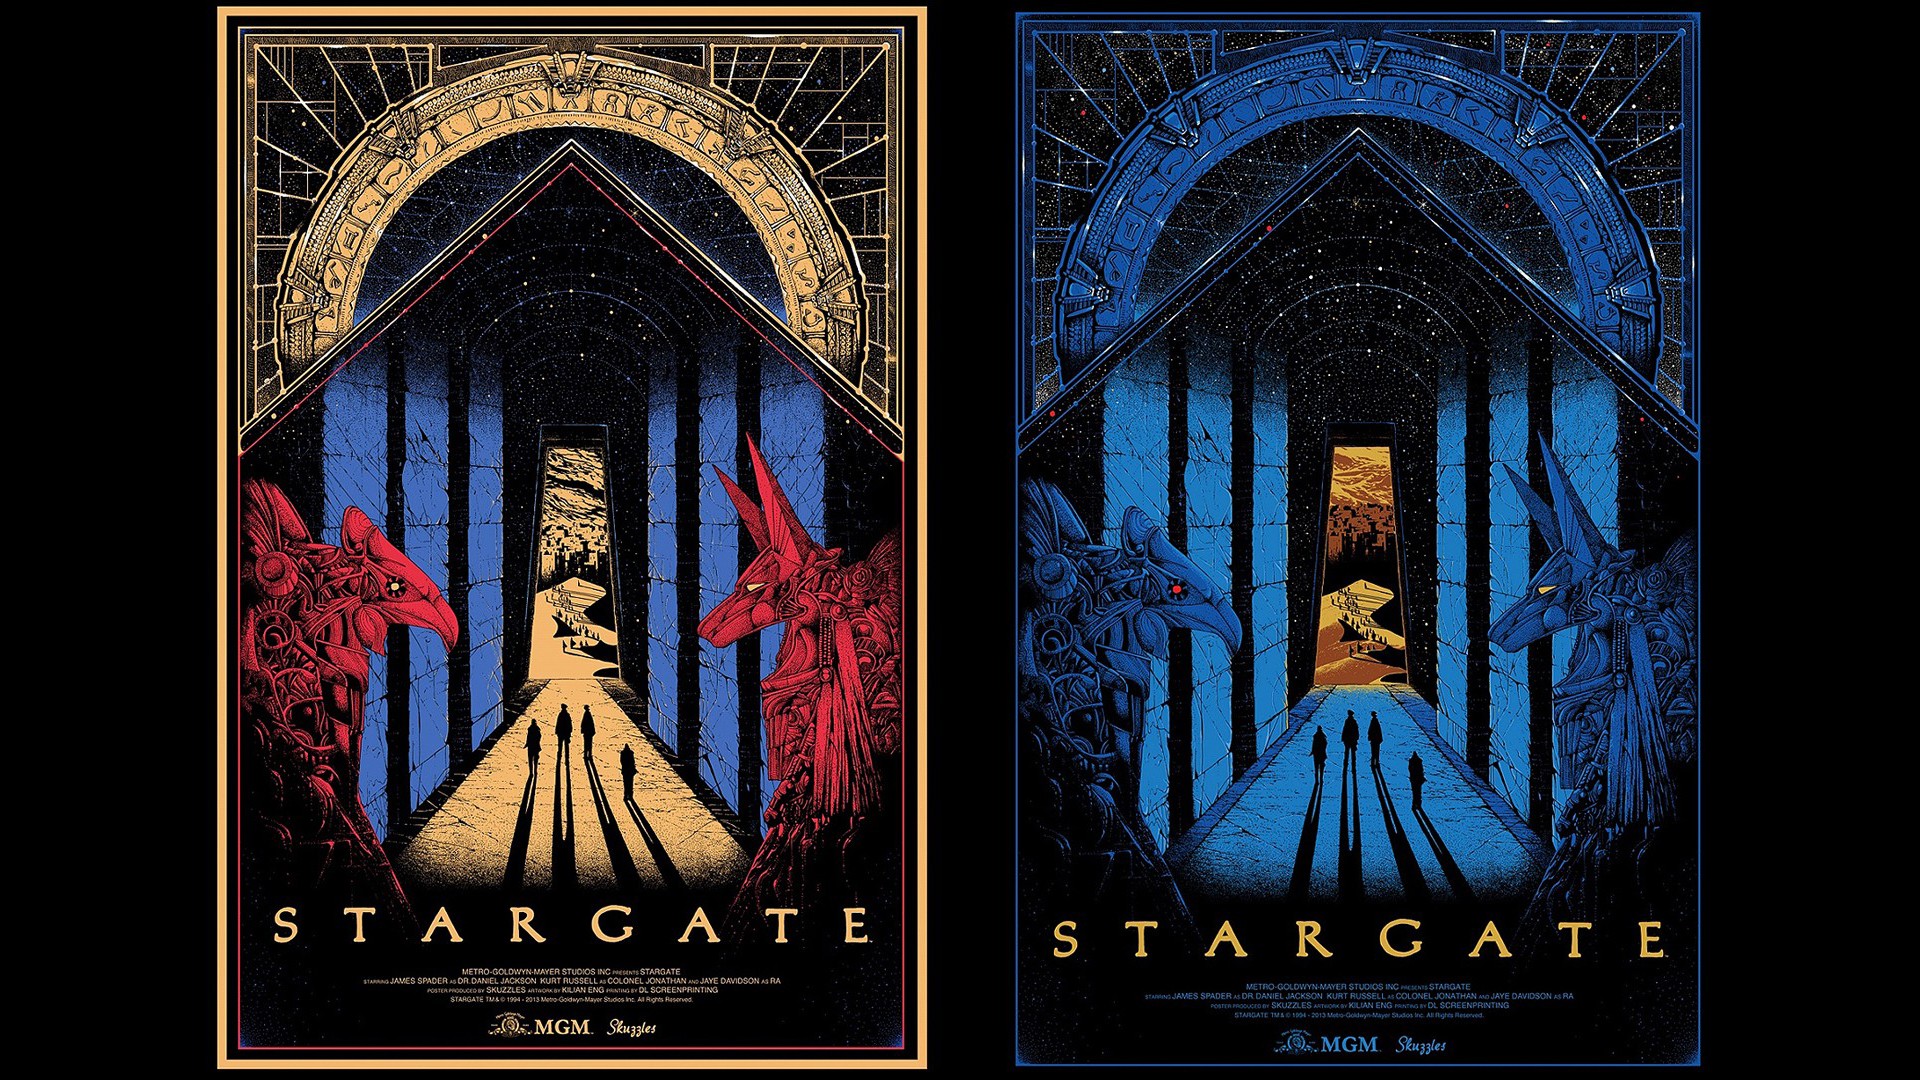 General 1920x1080 Stargate movies collage movie poster